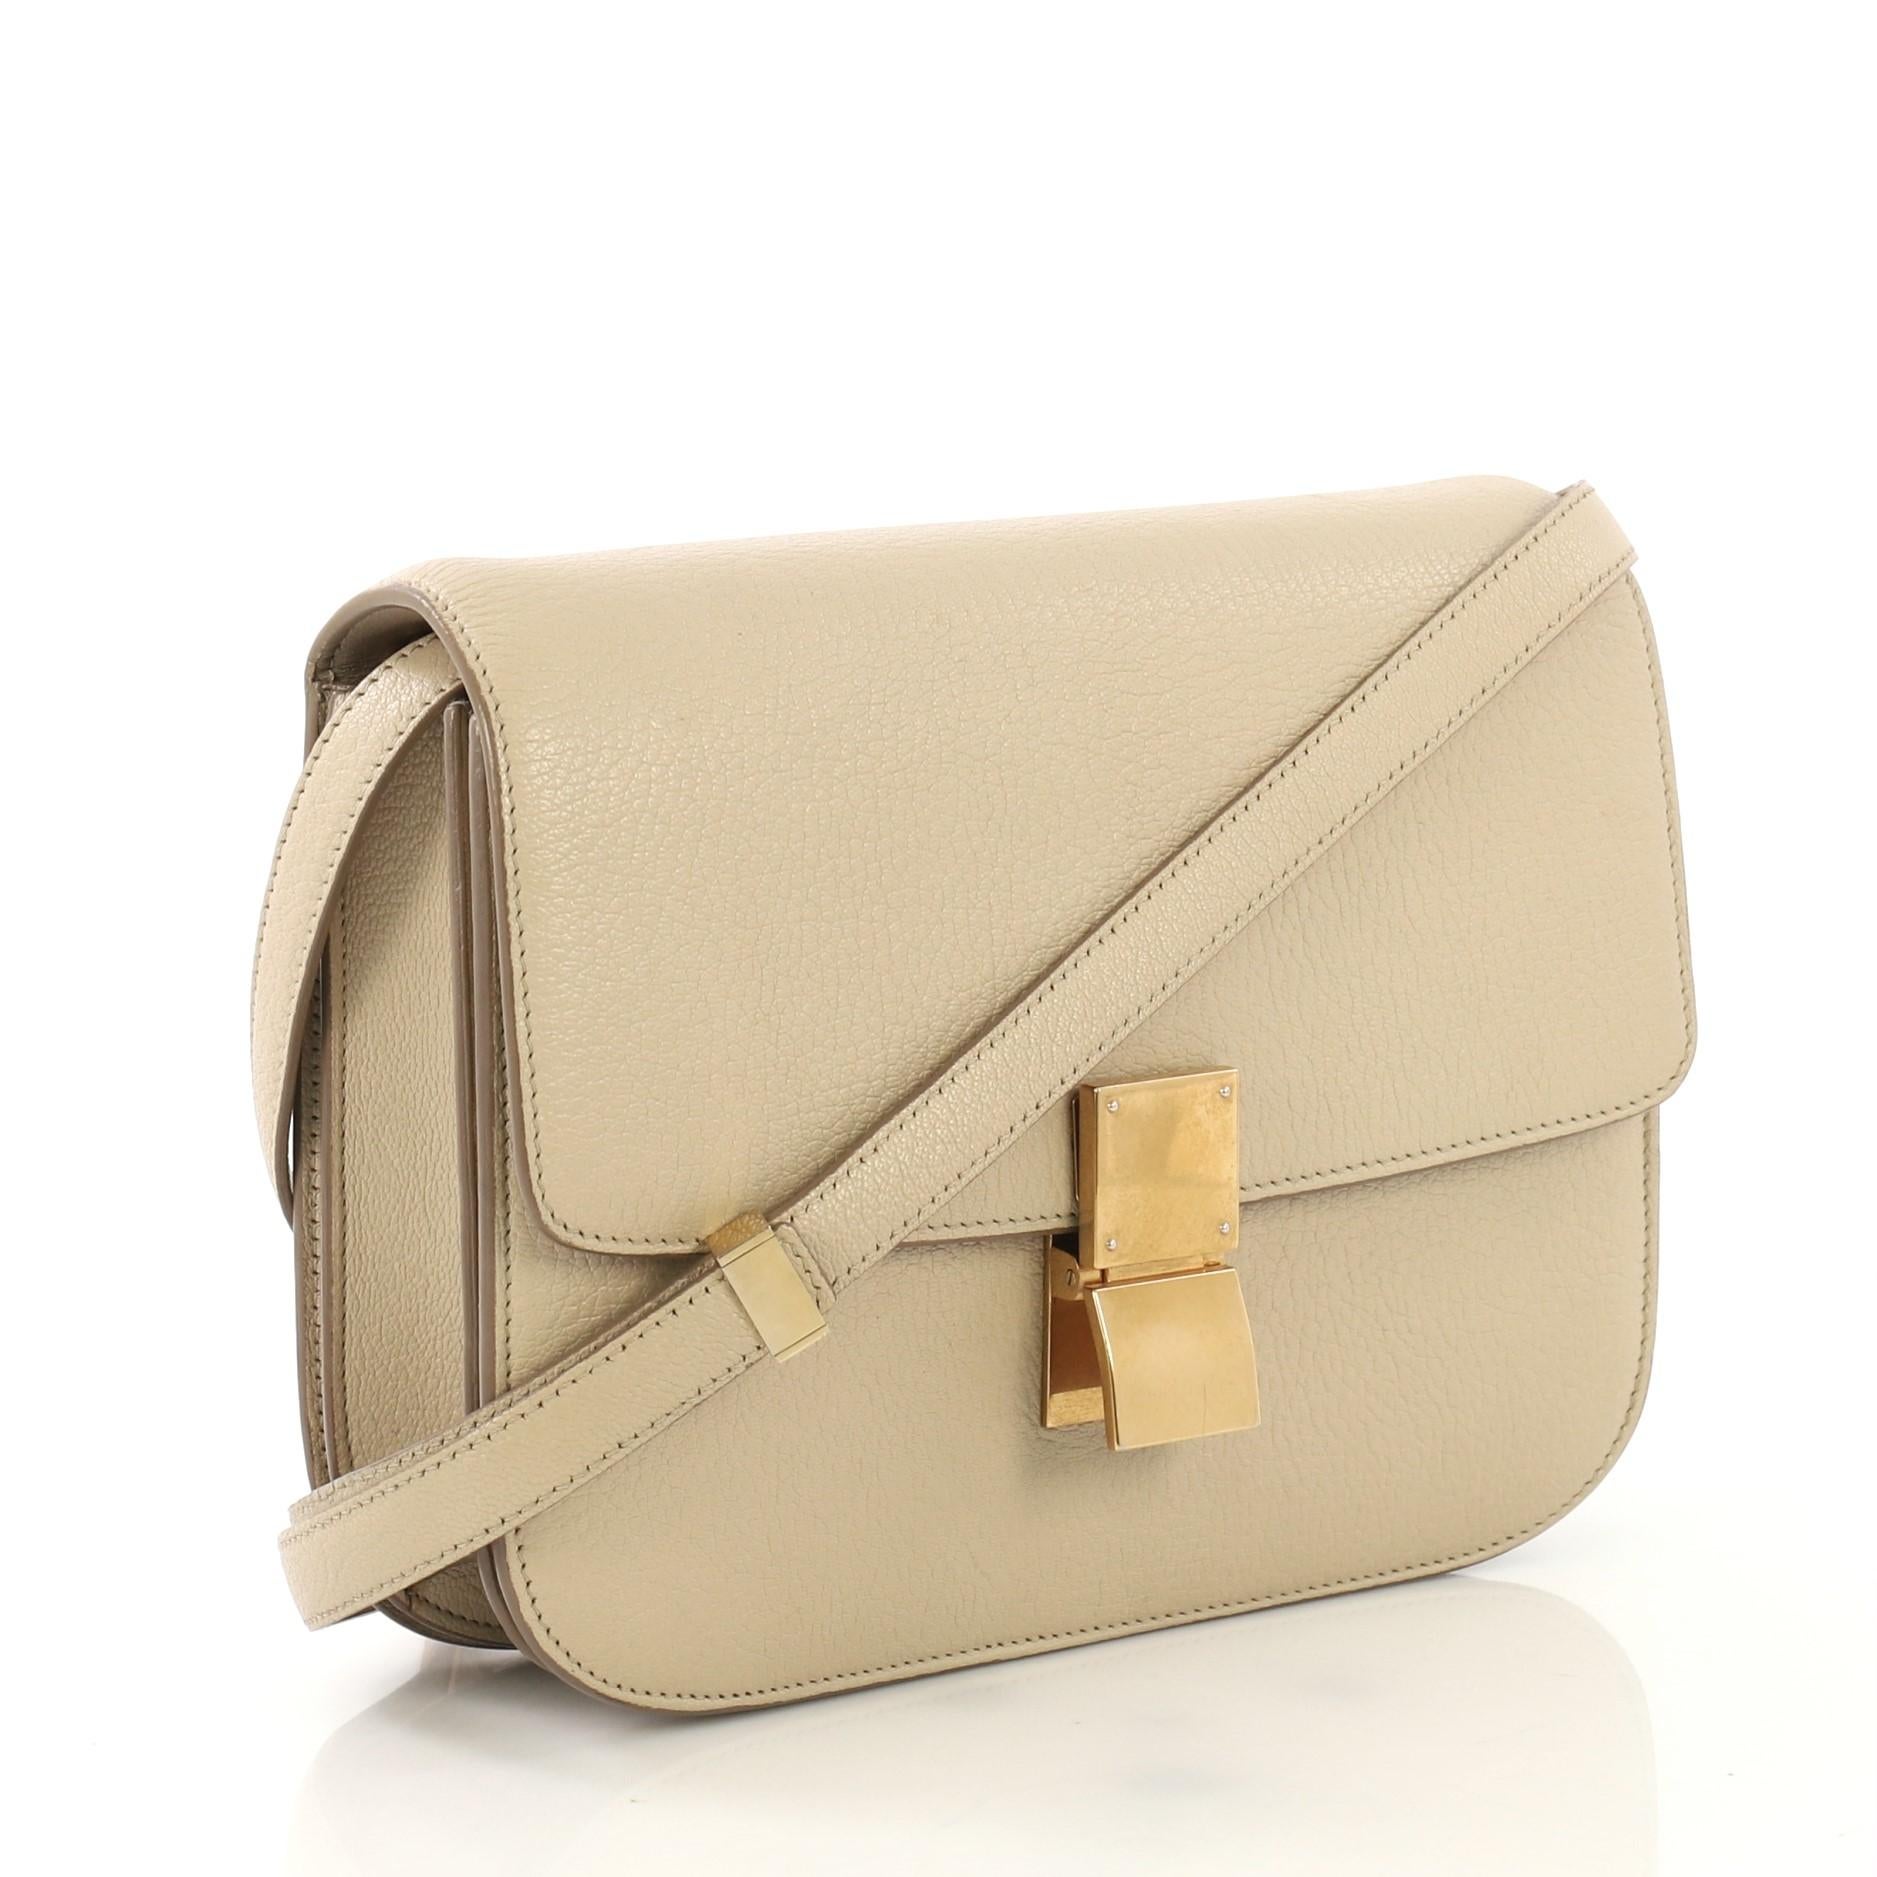 This Celine Classic Box Bag Grainy Leather Medium, crafted from beige goatskin leather, features a long adjustable strap and gold-tone hardware. Its push-tab closure opens to a beige leather interior with zip compartment and two open compartments